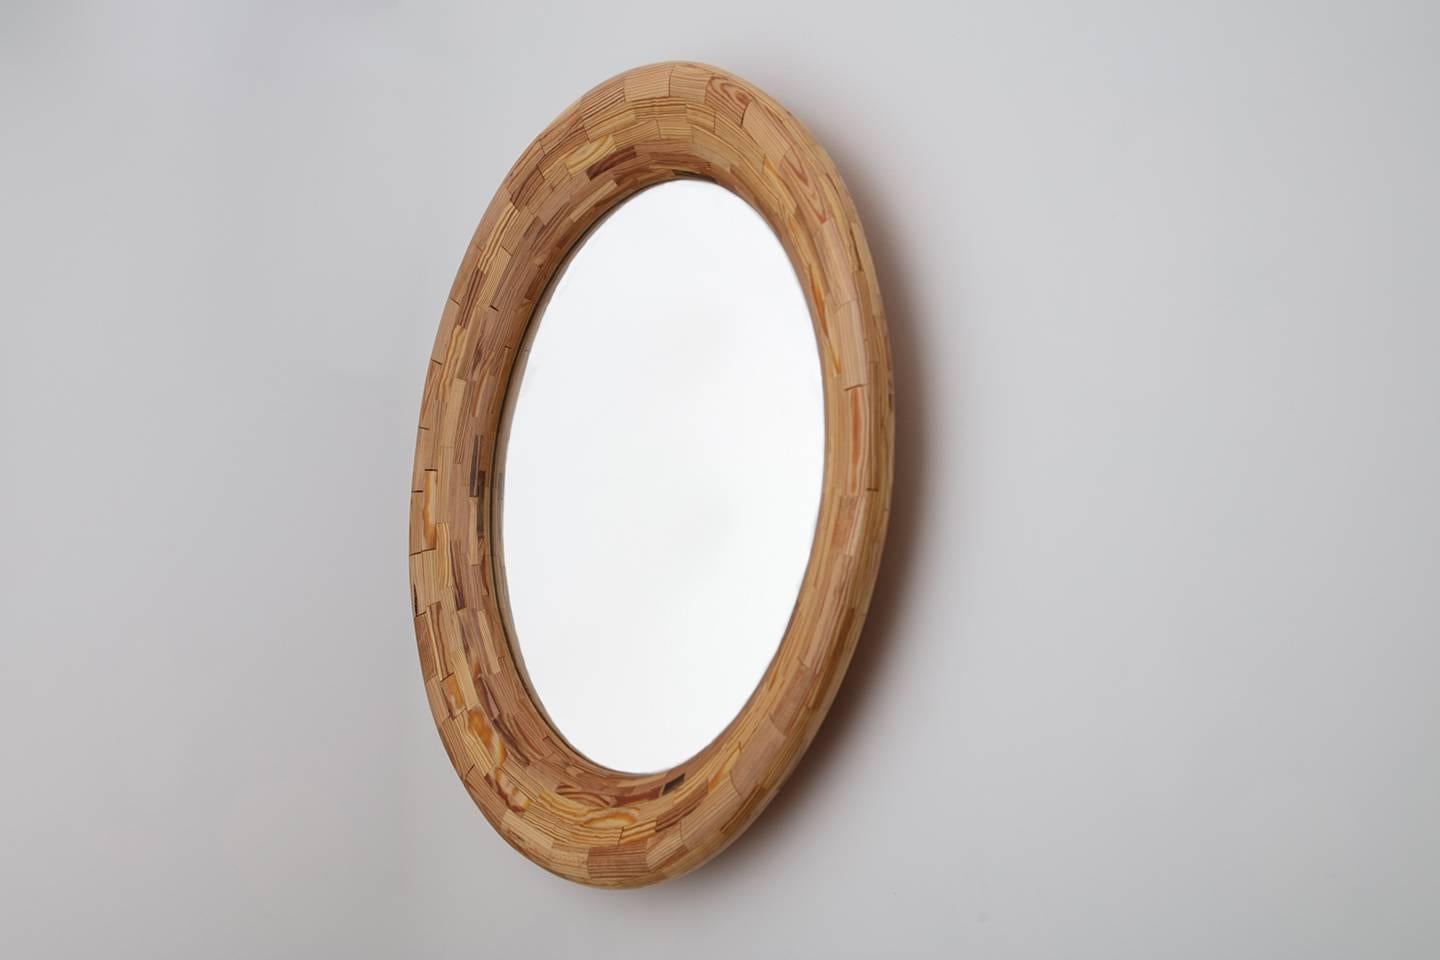 Part of Richard Haining's Stacked Collection, this 24 inch diameter round mirror has a 32-1/2 inch diameter frame made of reclaimed heart pine. The wood was salvaged offcuts from a gutted Brooklyn Brownstone's building joist. The wood's natural